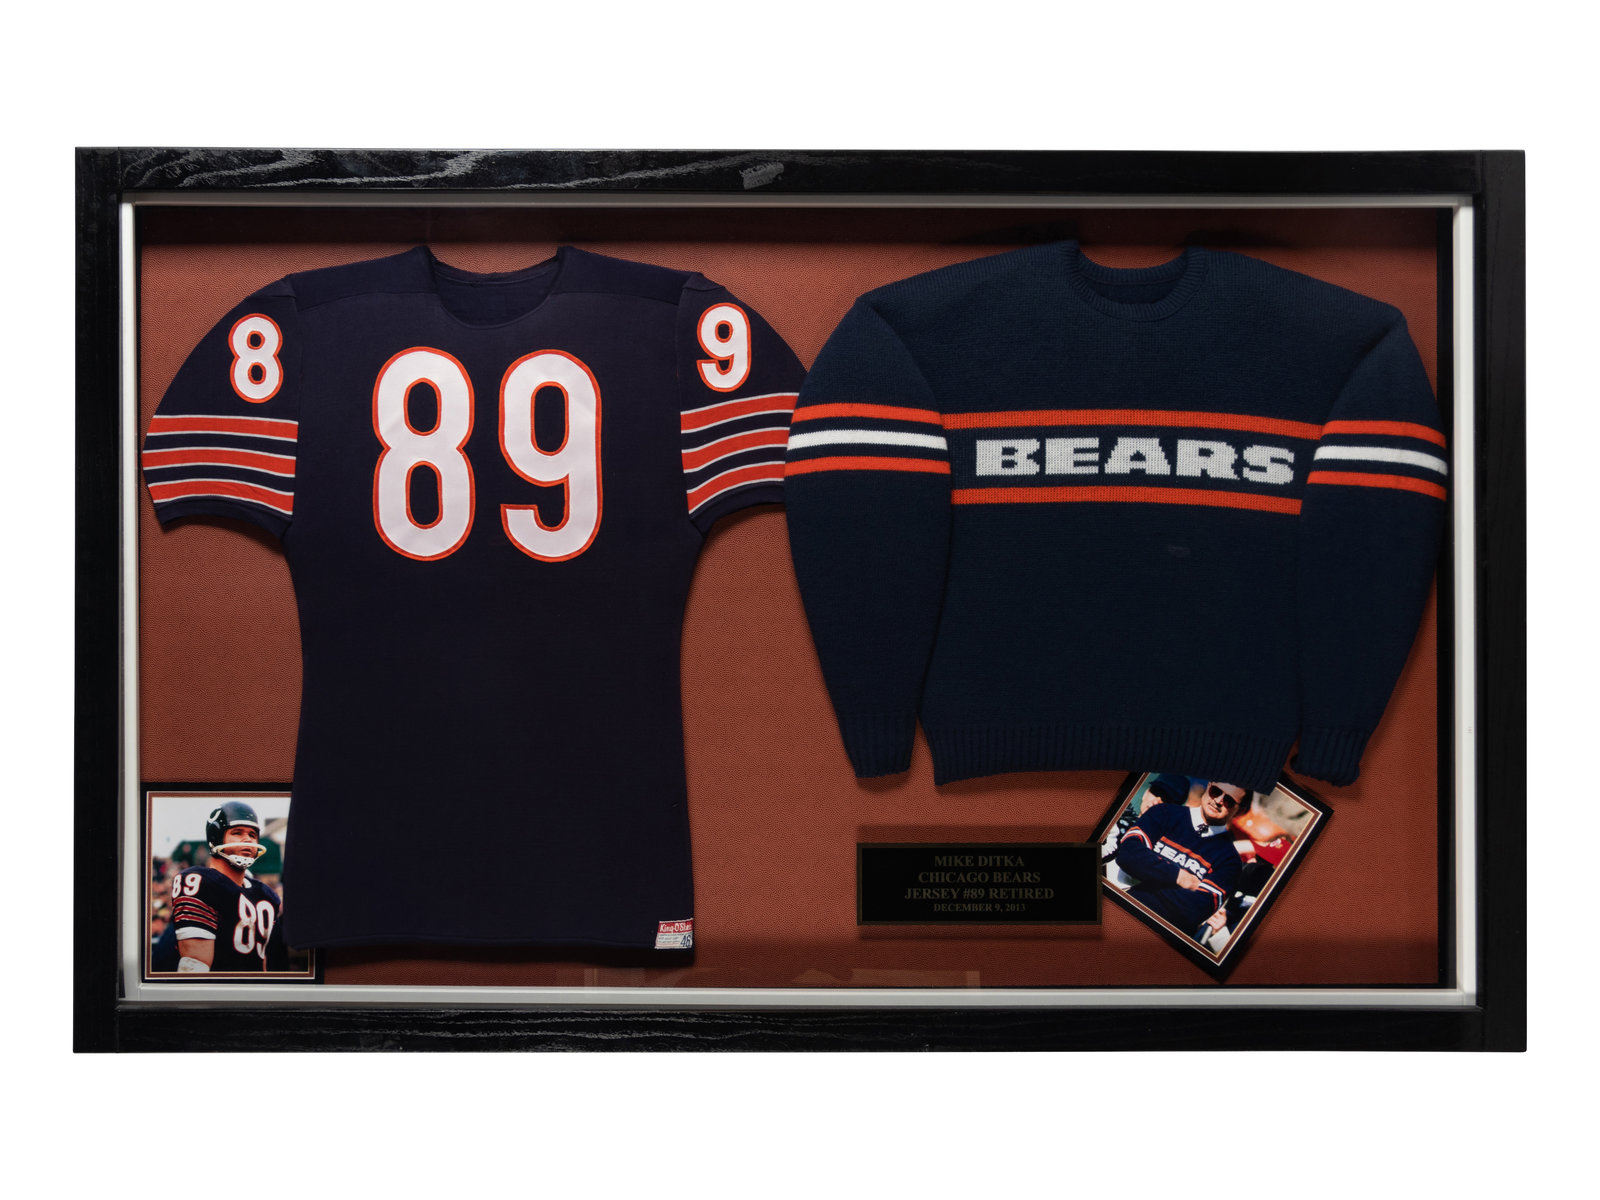 Mike Ditka's Chicago Bears Jersey and Sweater Retirement Presentation  Formerly Displayed at Mike Ditka's Restaurant